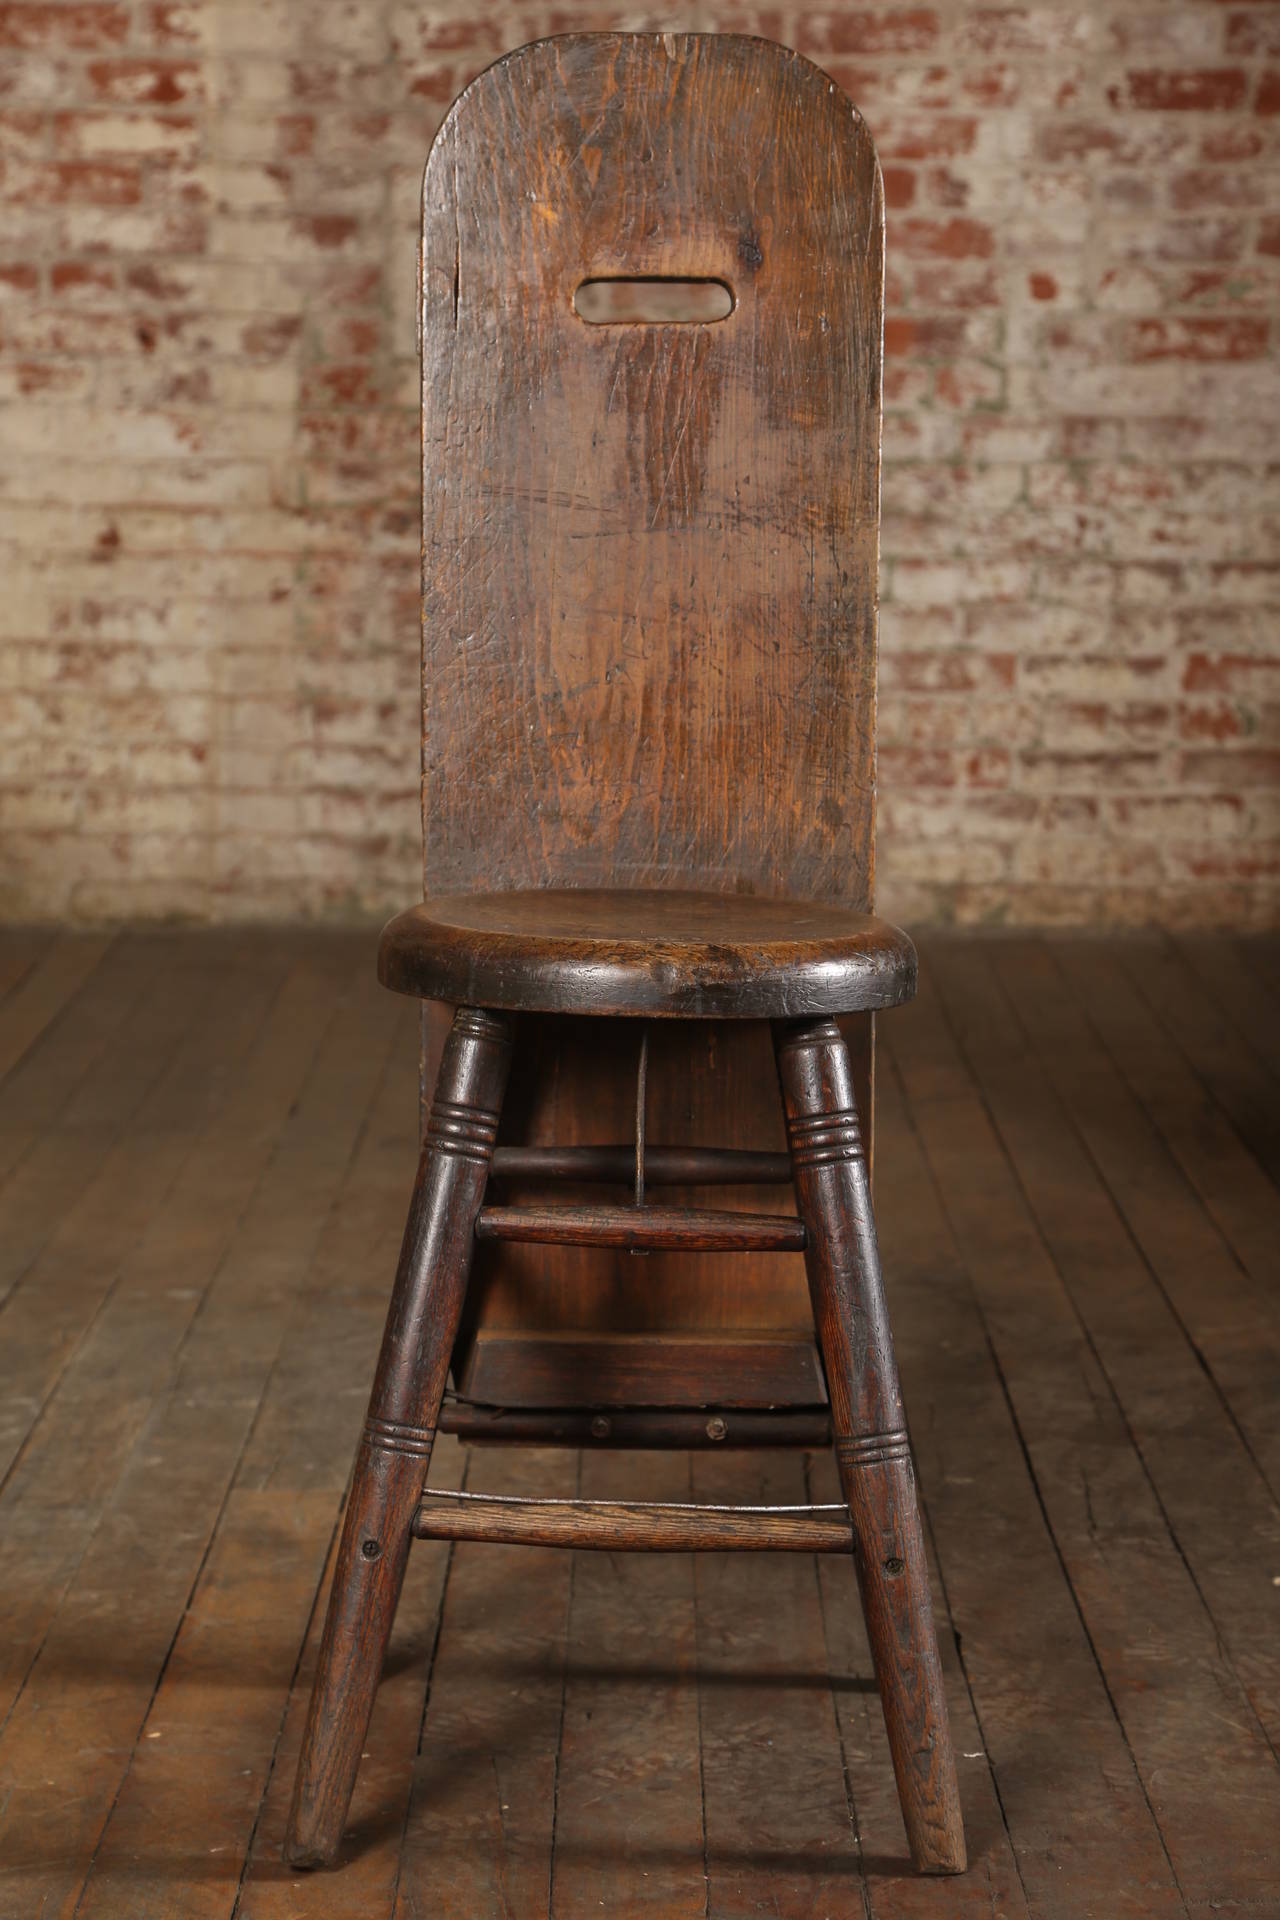 Original Unique American Made Vintage Industrial Factory Oak Shop Stool, Chair with Pine Back. Stool Height Measures 21